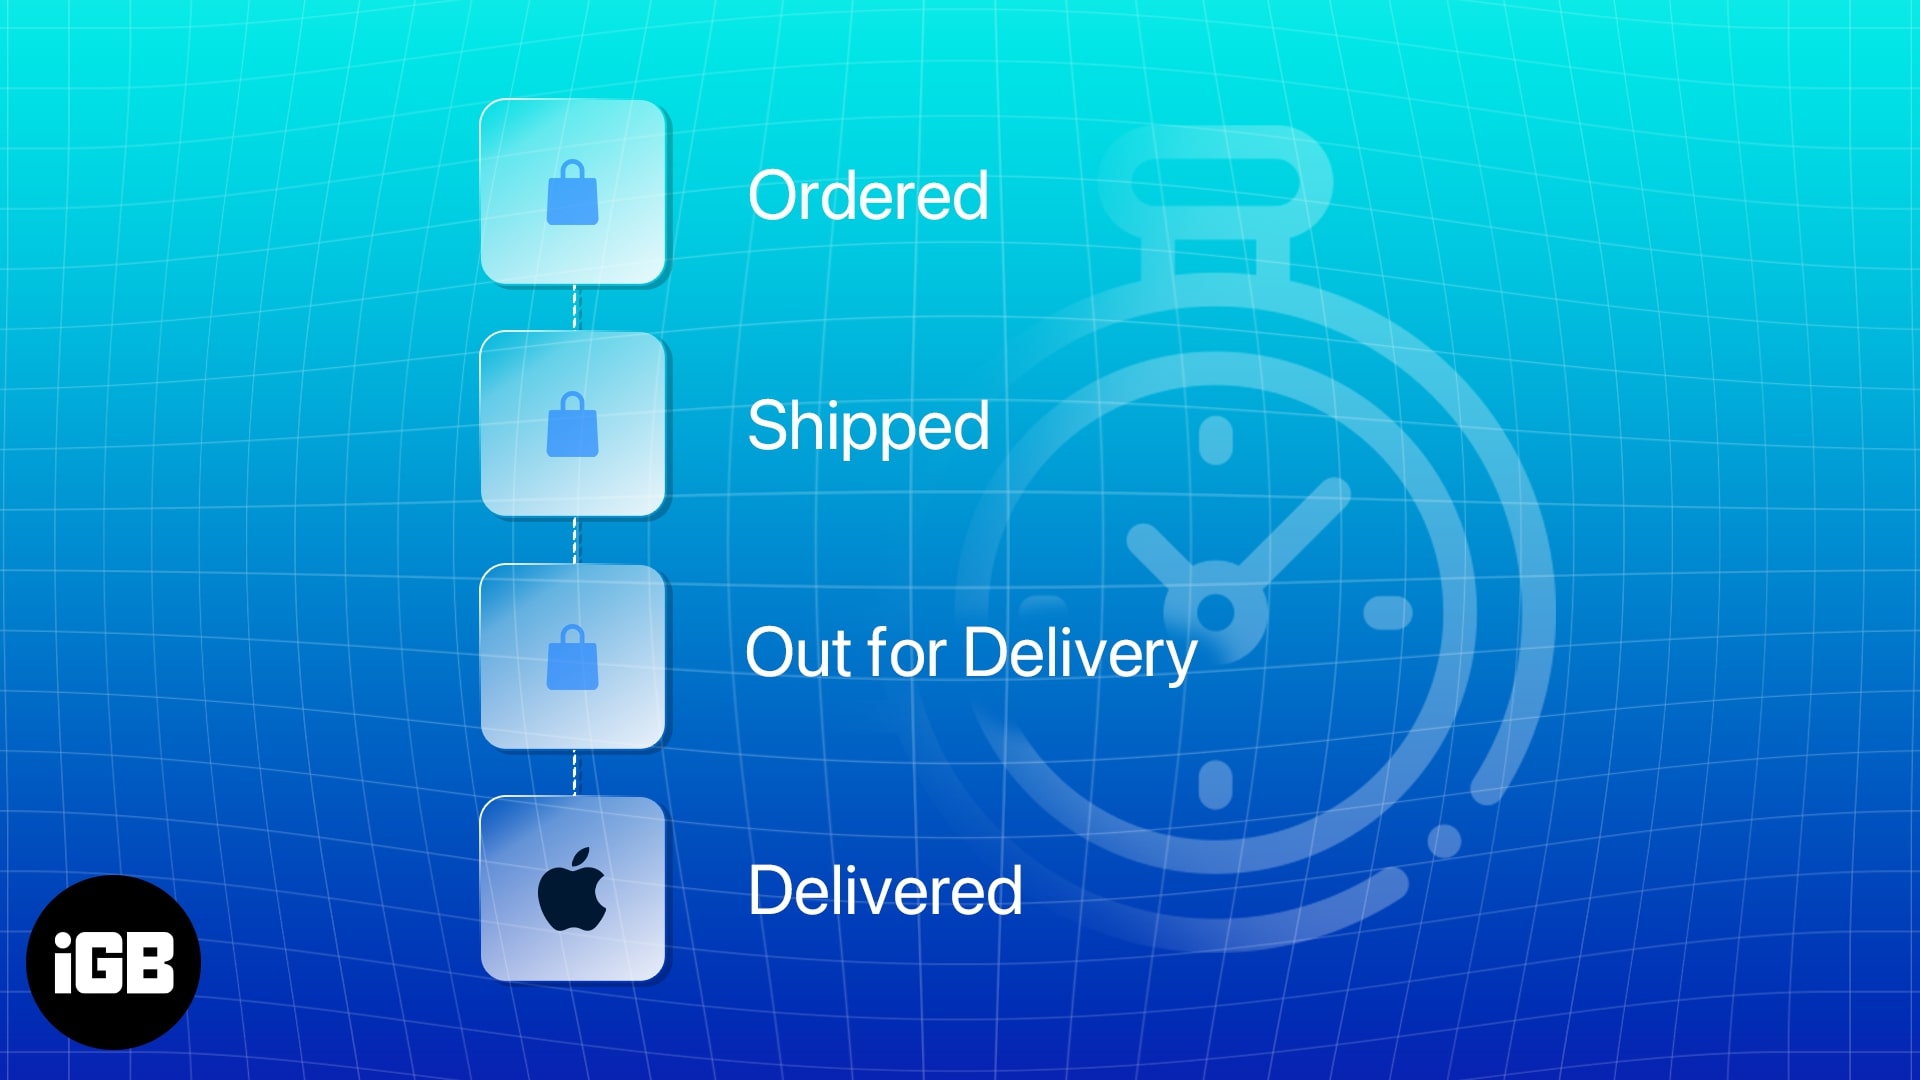 How long does Apple take to ship products?